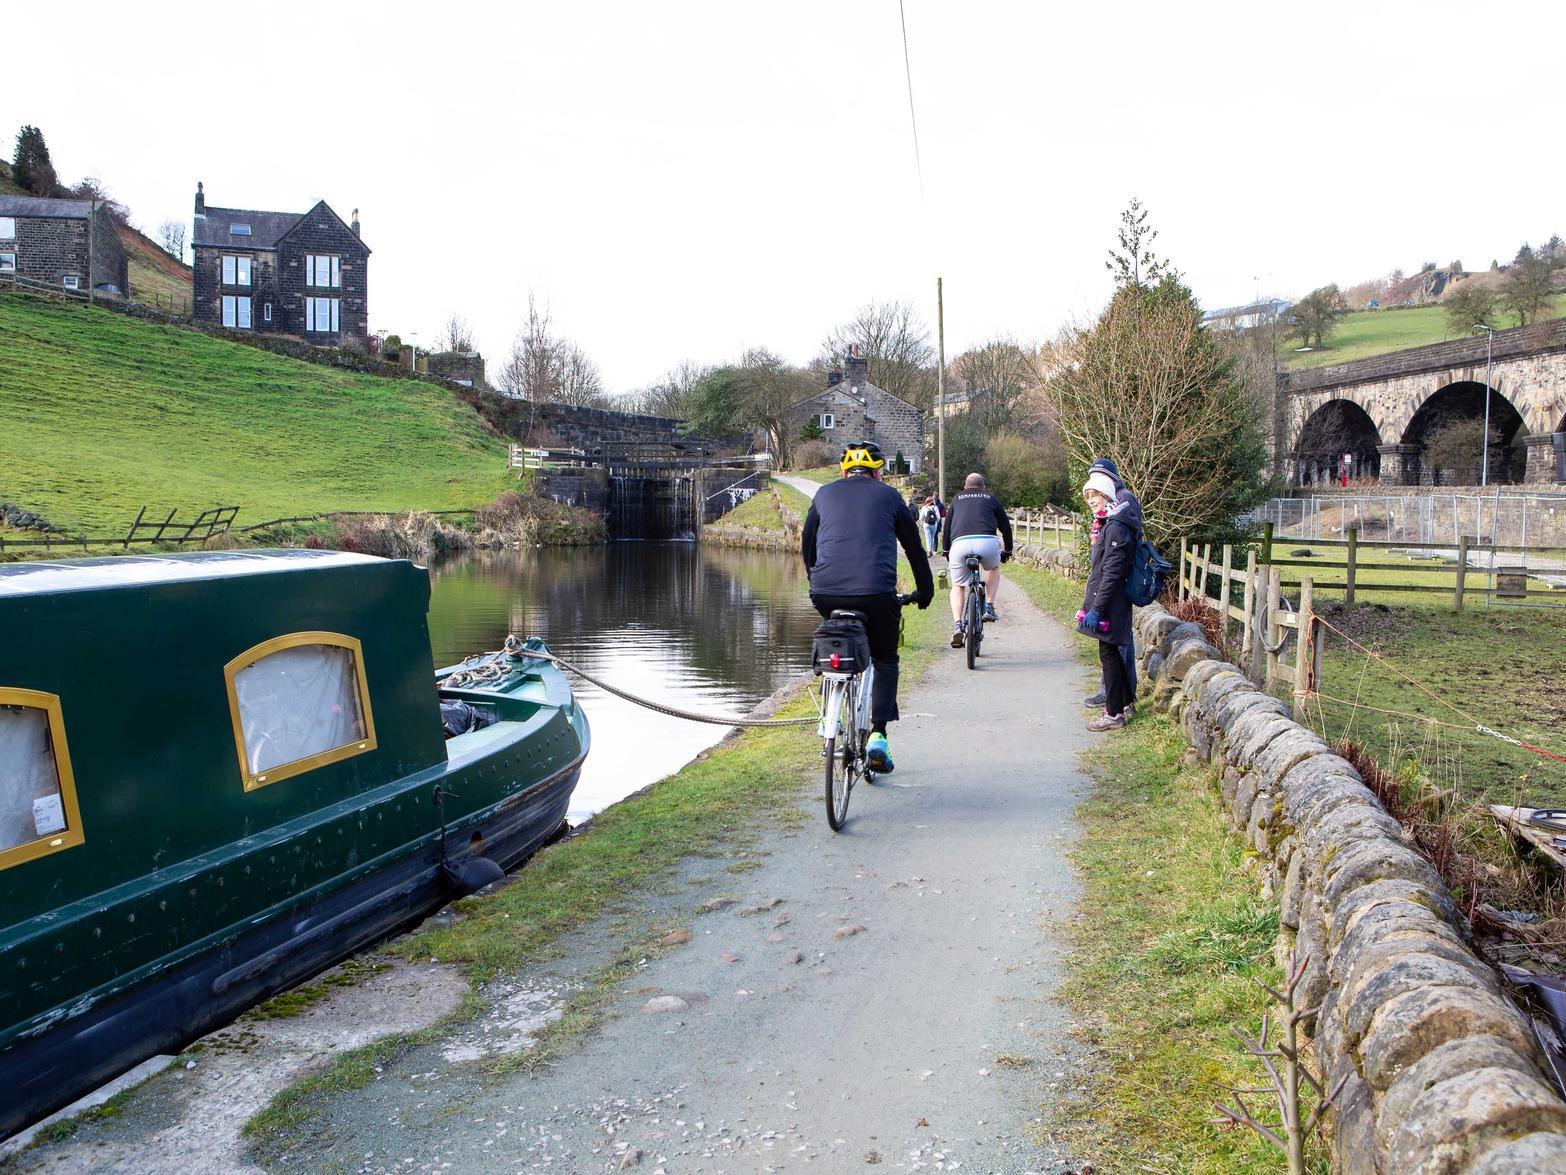 According to TripAdvisor one of the most popular attractions in Hebden Bridge is the canalside. A very scenic way to see part of Calderdale why not take a stroll by the water.